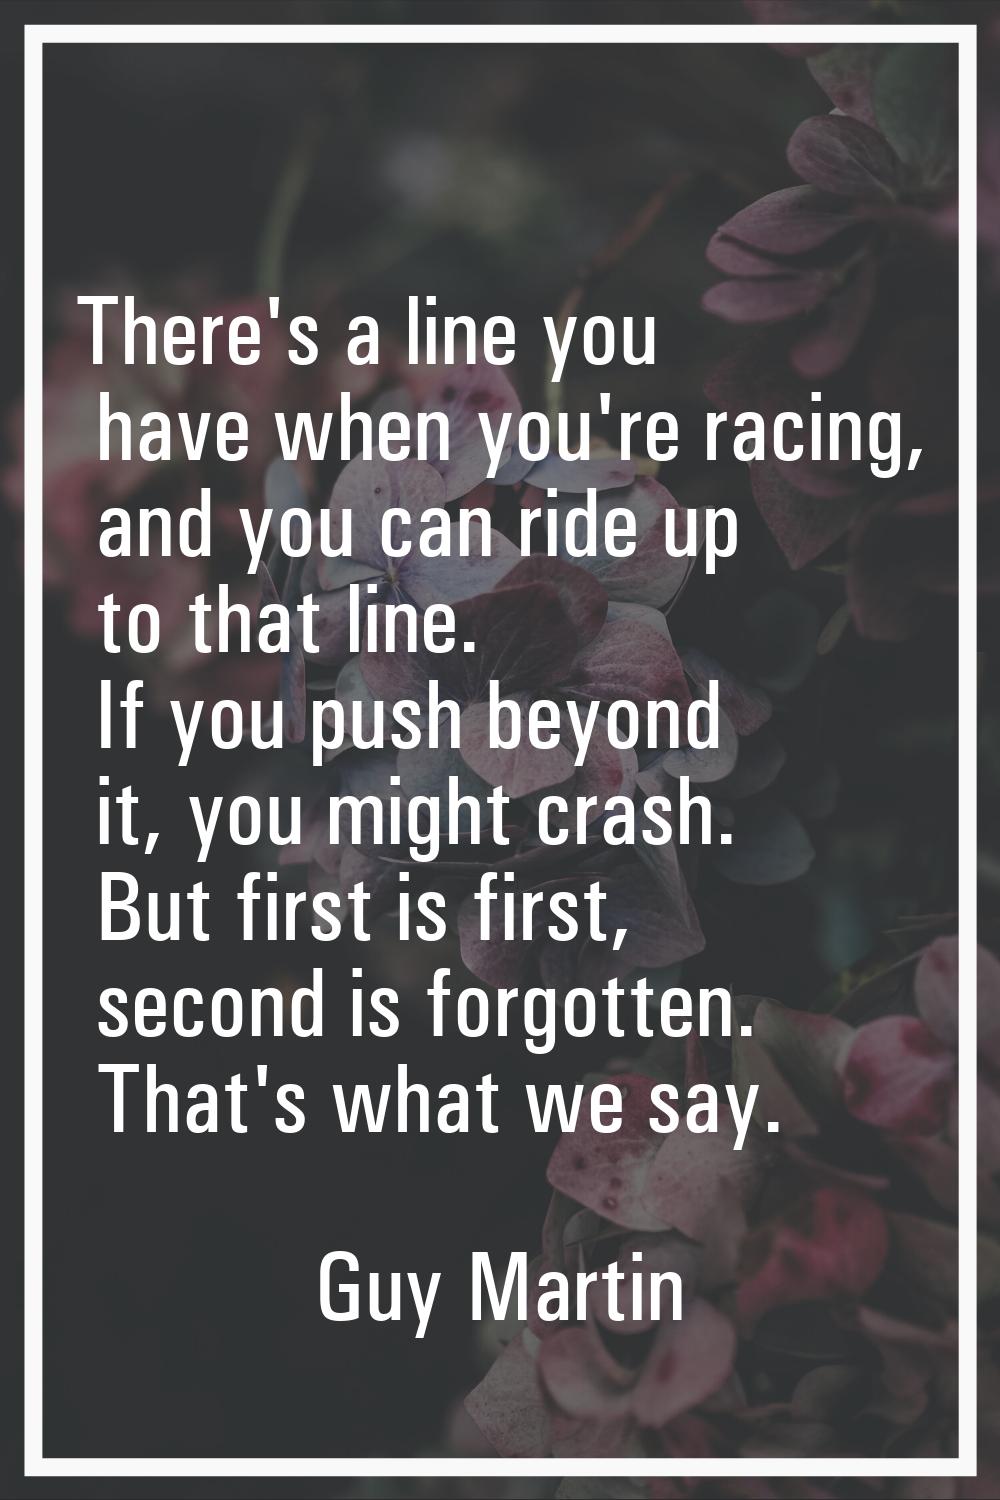 There's a line you have when you're racing, and you can ride up to that line. If you push beyond it